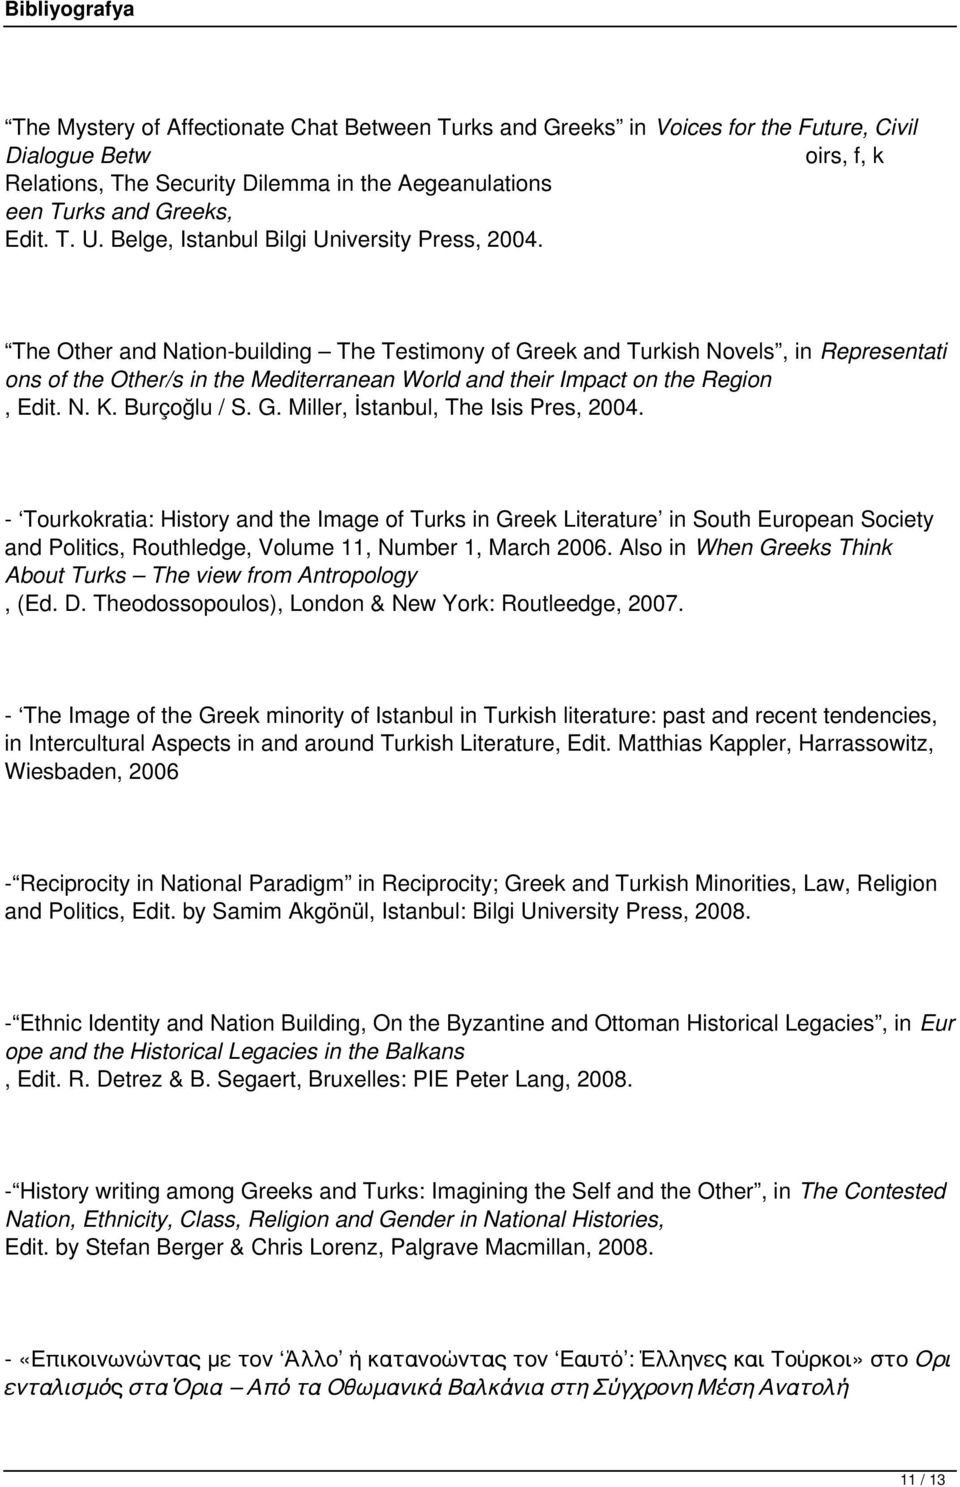 The Other and Nation-building The Testimony of Greek and Turkish Novels, in Representati ons of the Other/s in the Mediterranean World and their Impact on the Region, Edit. N. K. Burçoğlu / S. G. Miller, İstanbul, The Isis Pres, 2004.